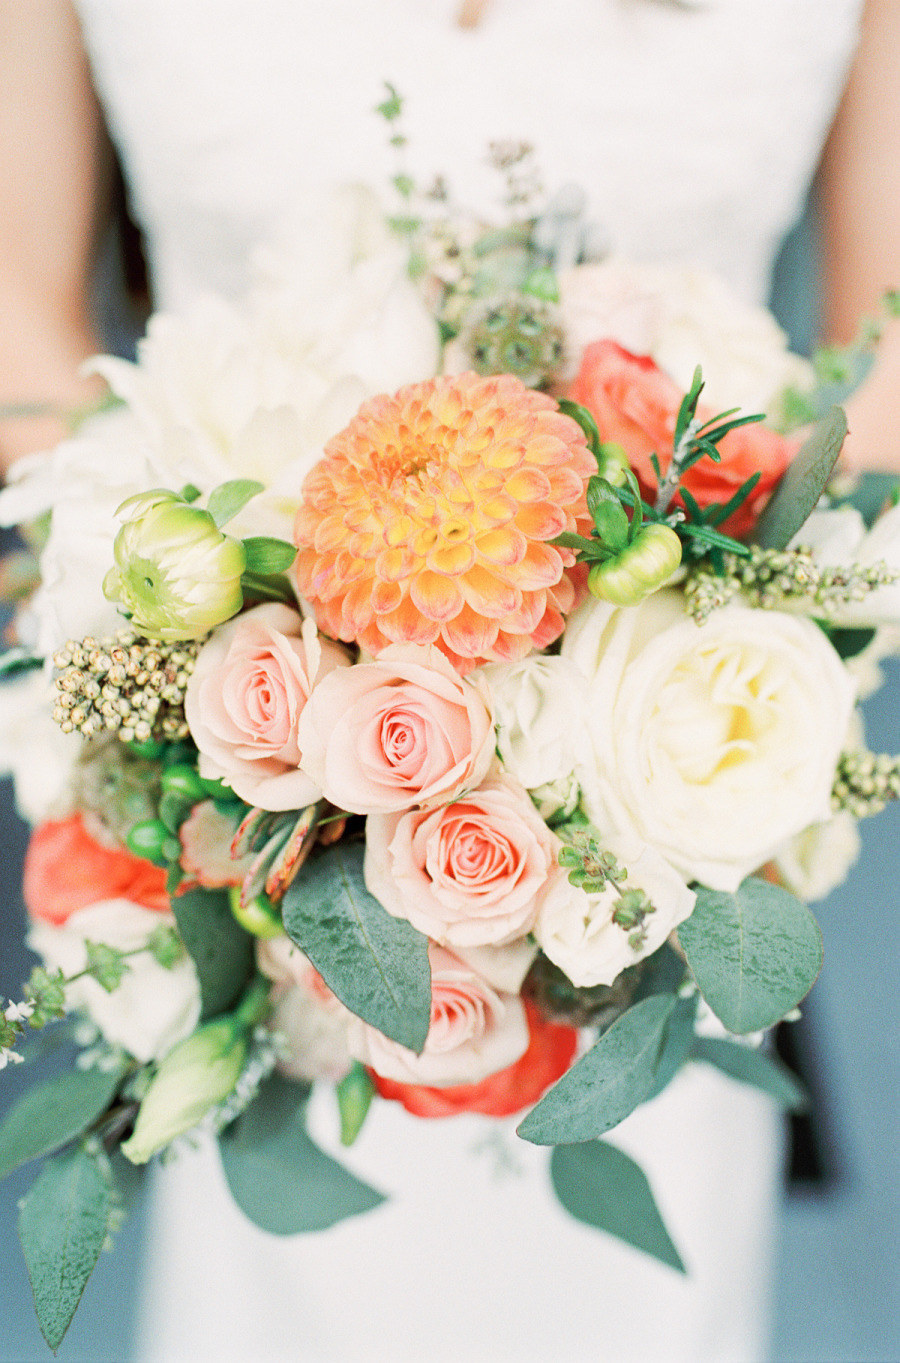 9 Ridiculously Stunning Spring Wedding Ideas They Won't Believe You DIY'd